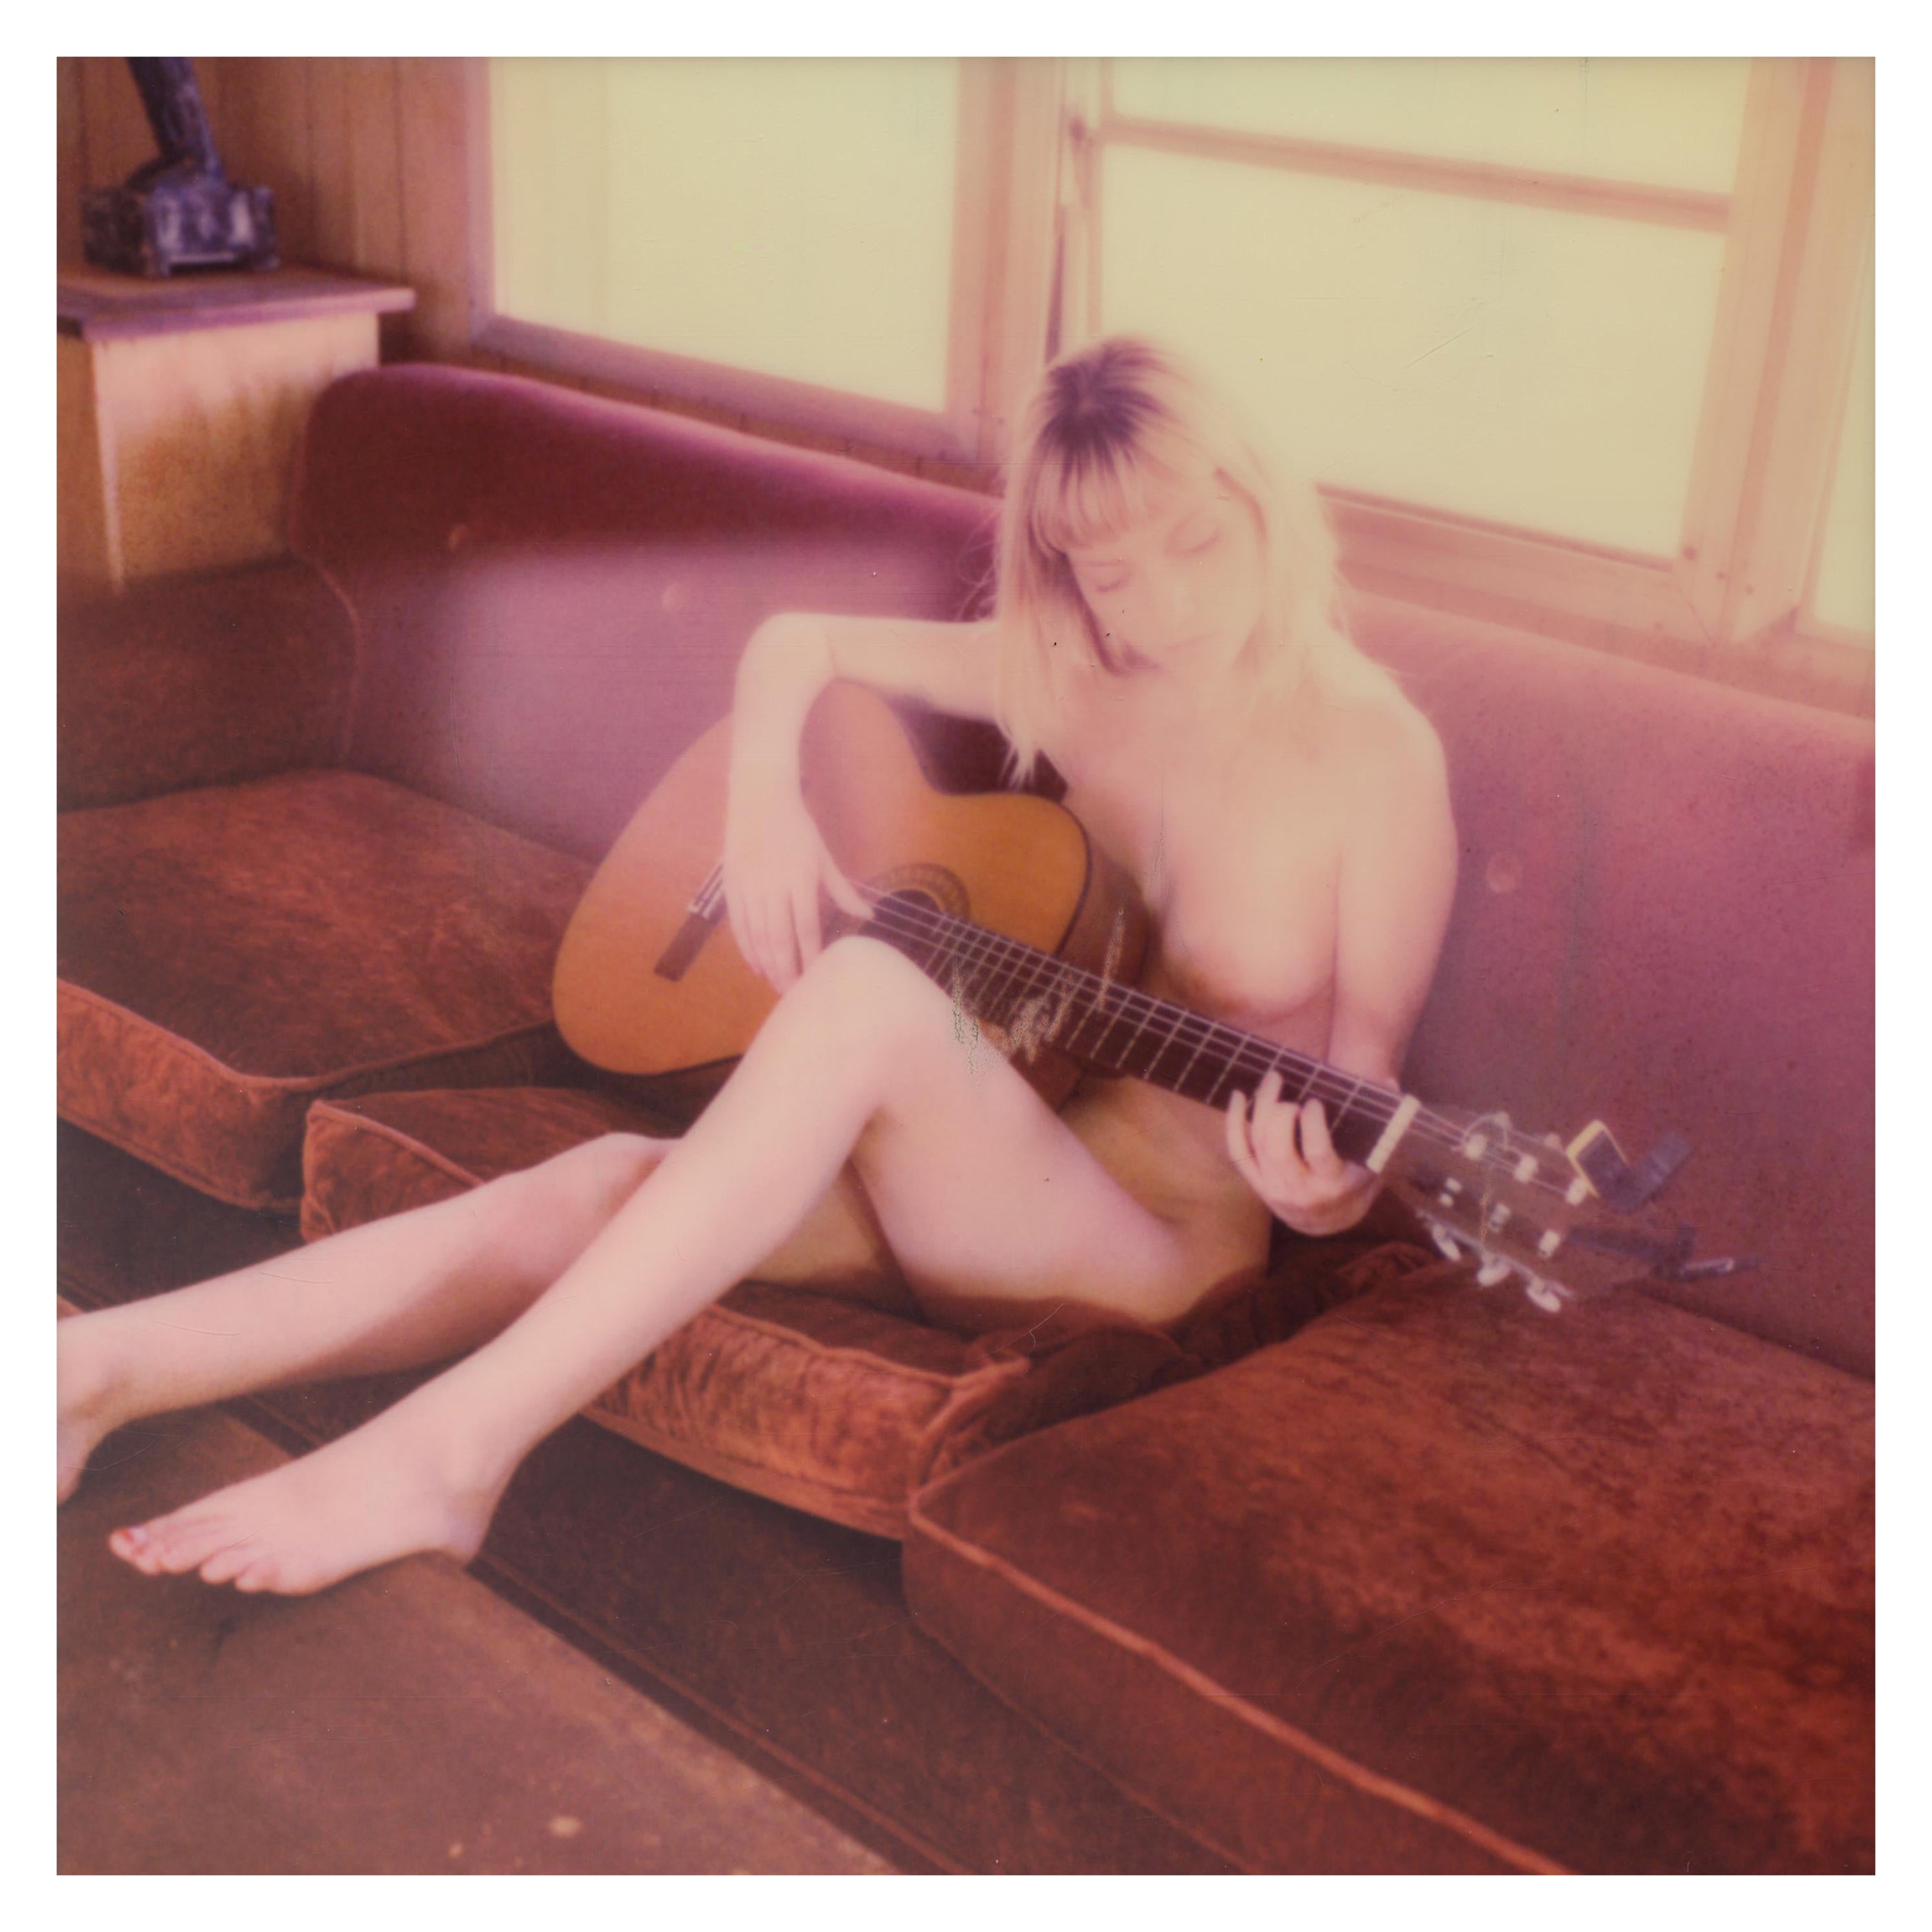 (This is not a) Lovesong - Contemporary, Nude, Women, Polaroid, 21st Century